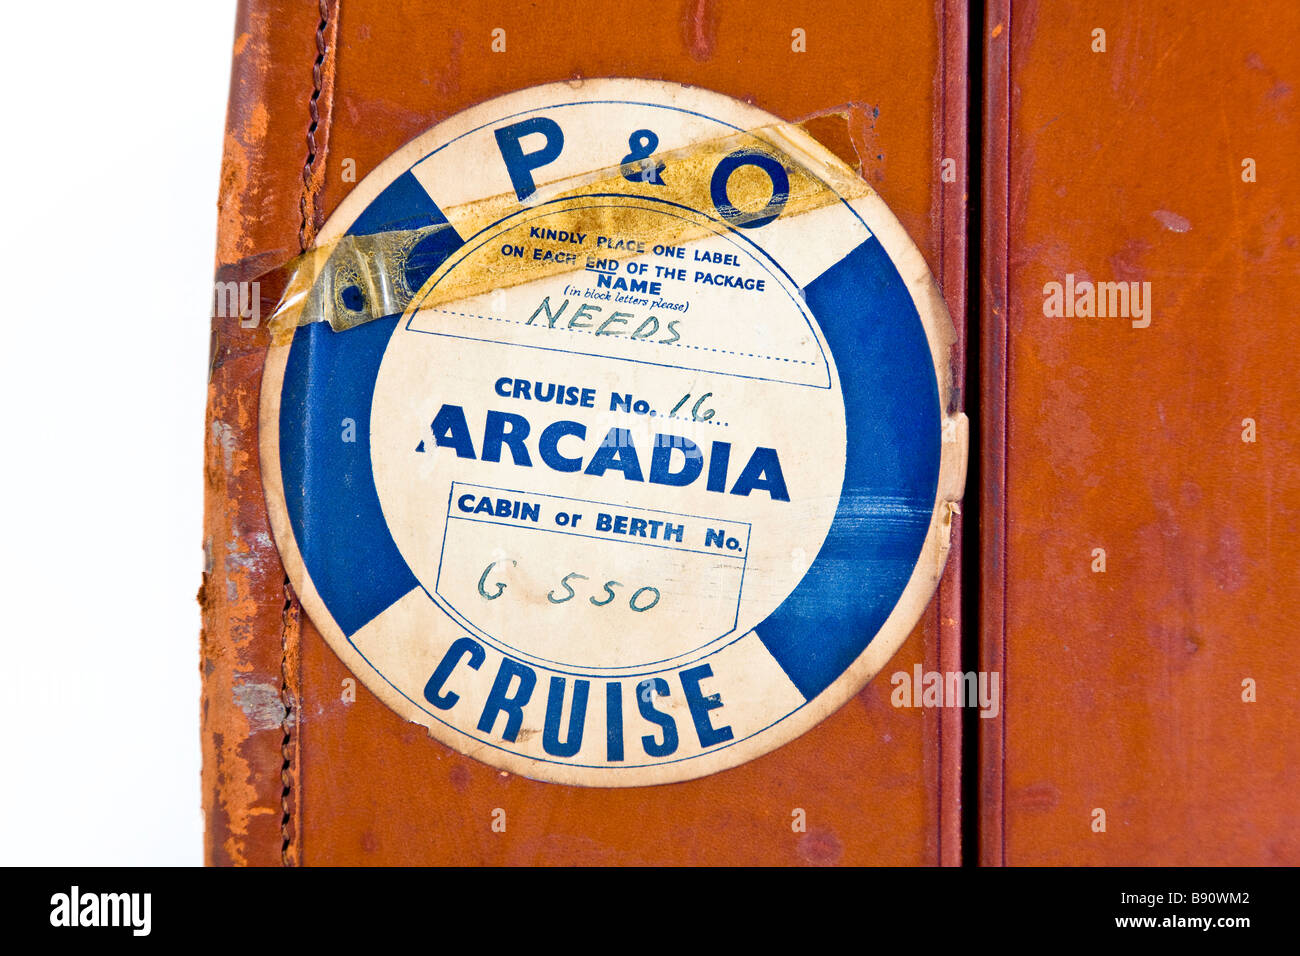 Old vintage suitcase with travel labels Stock Photo by ©PHOTOLOGY1971  53434113